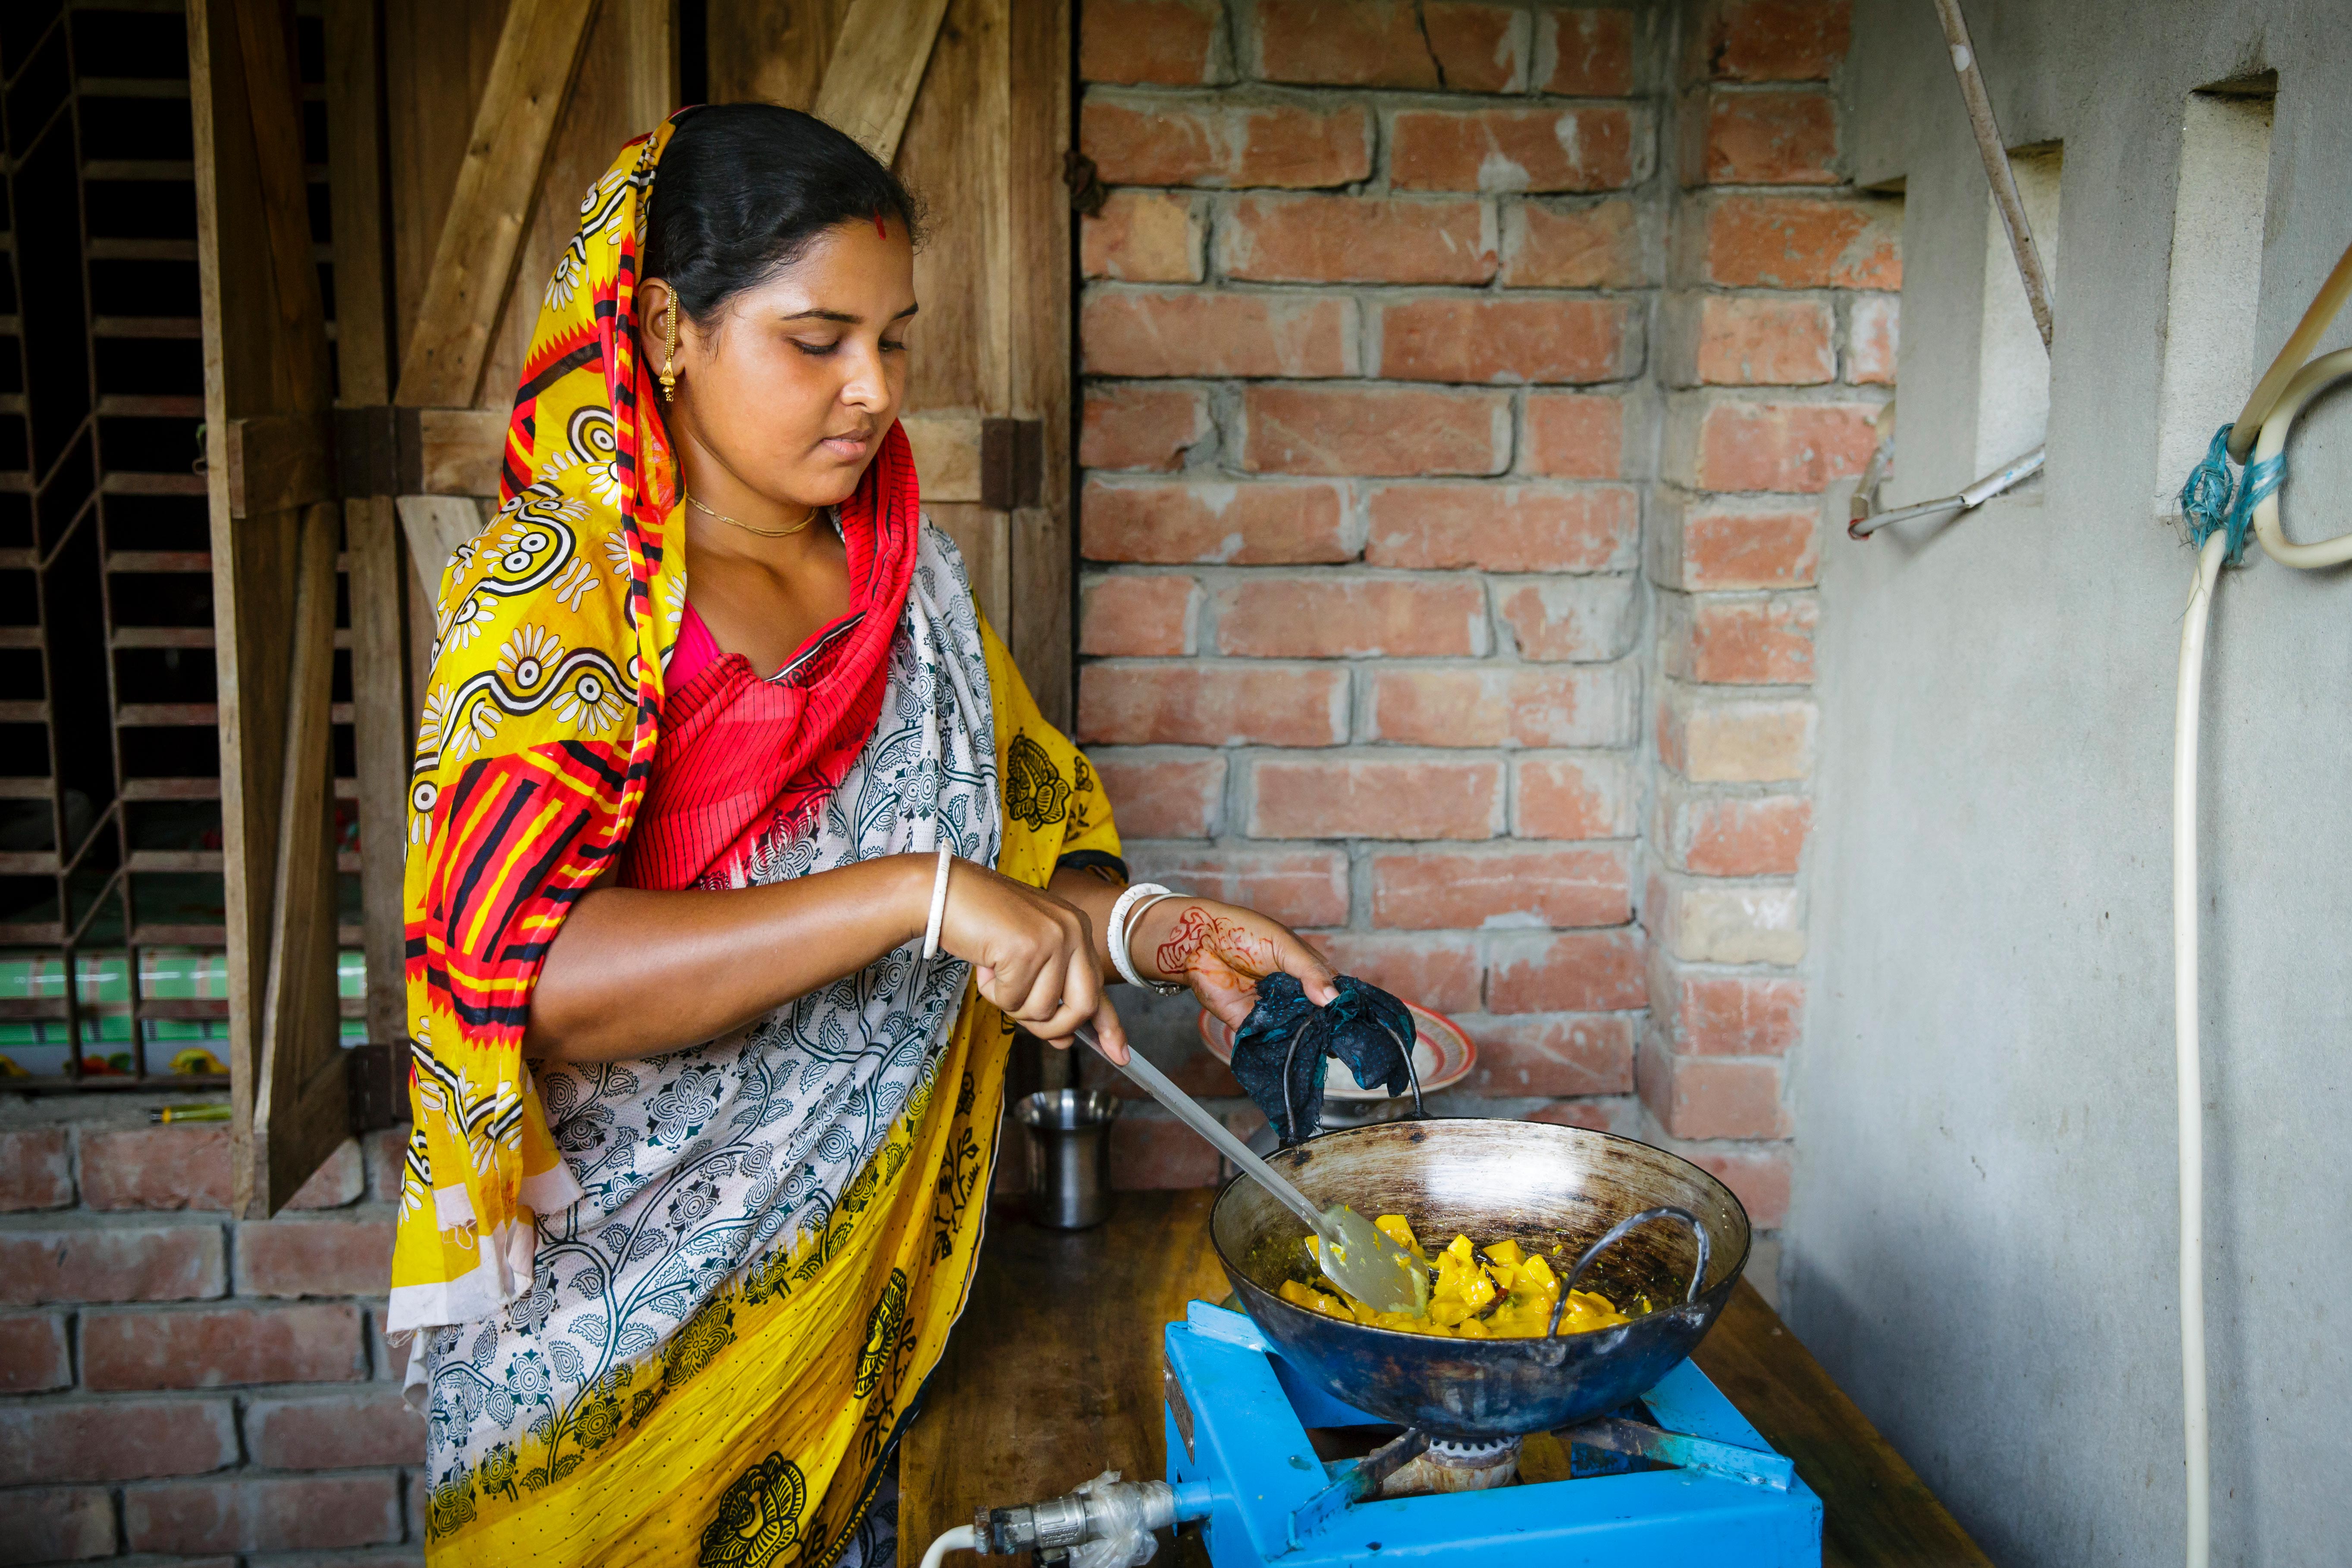 Women cooking on a gas stove